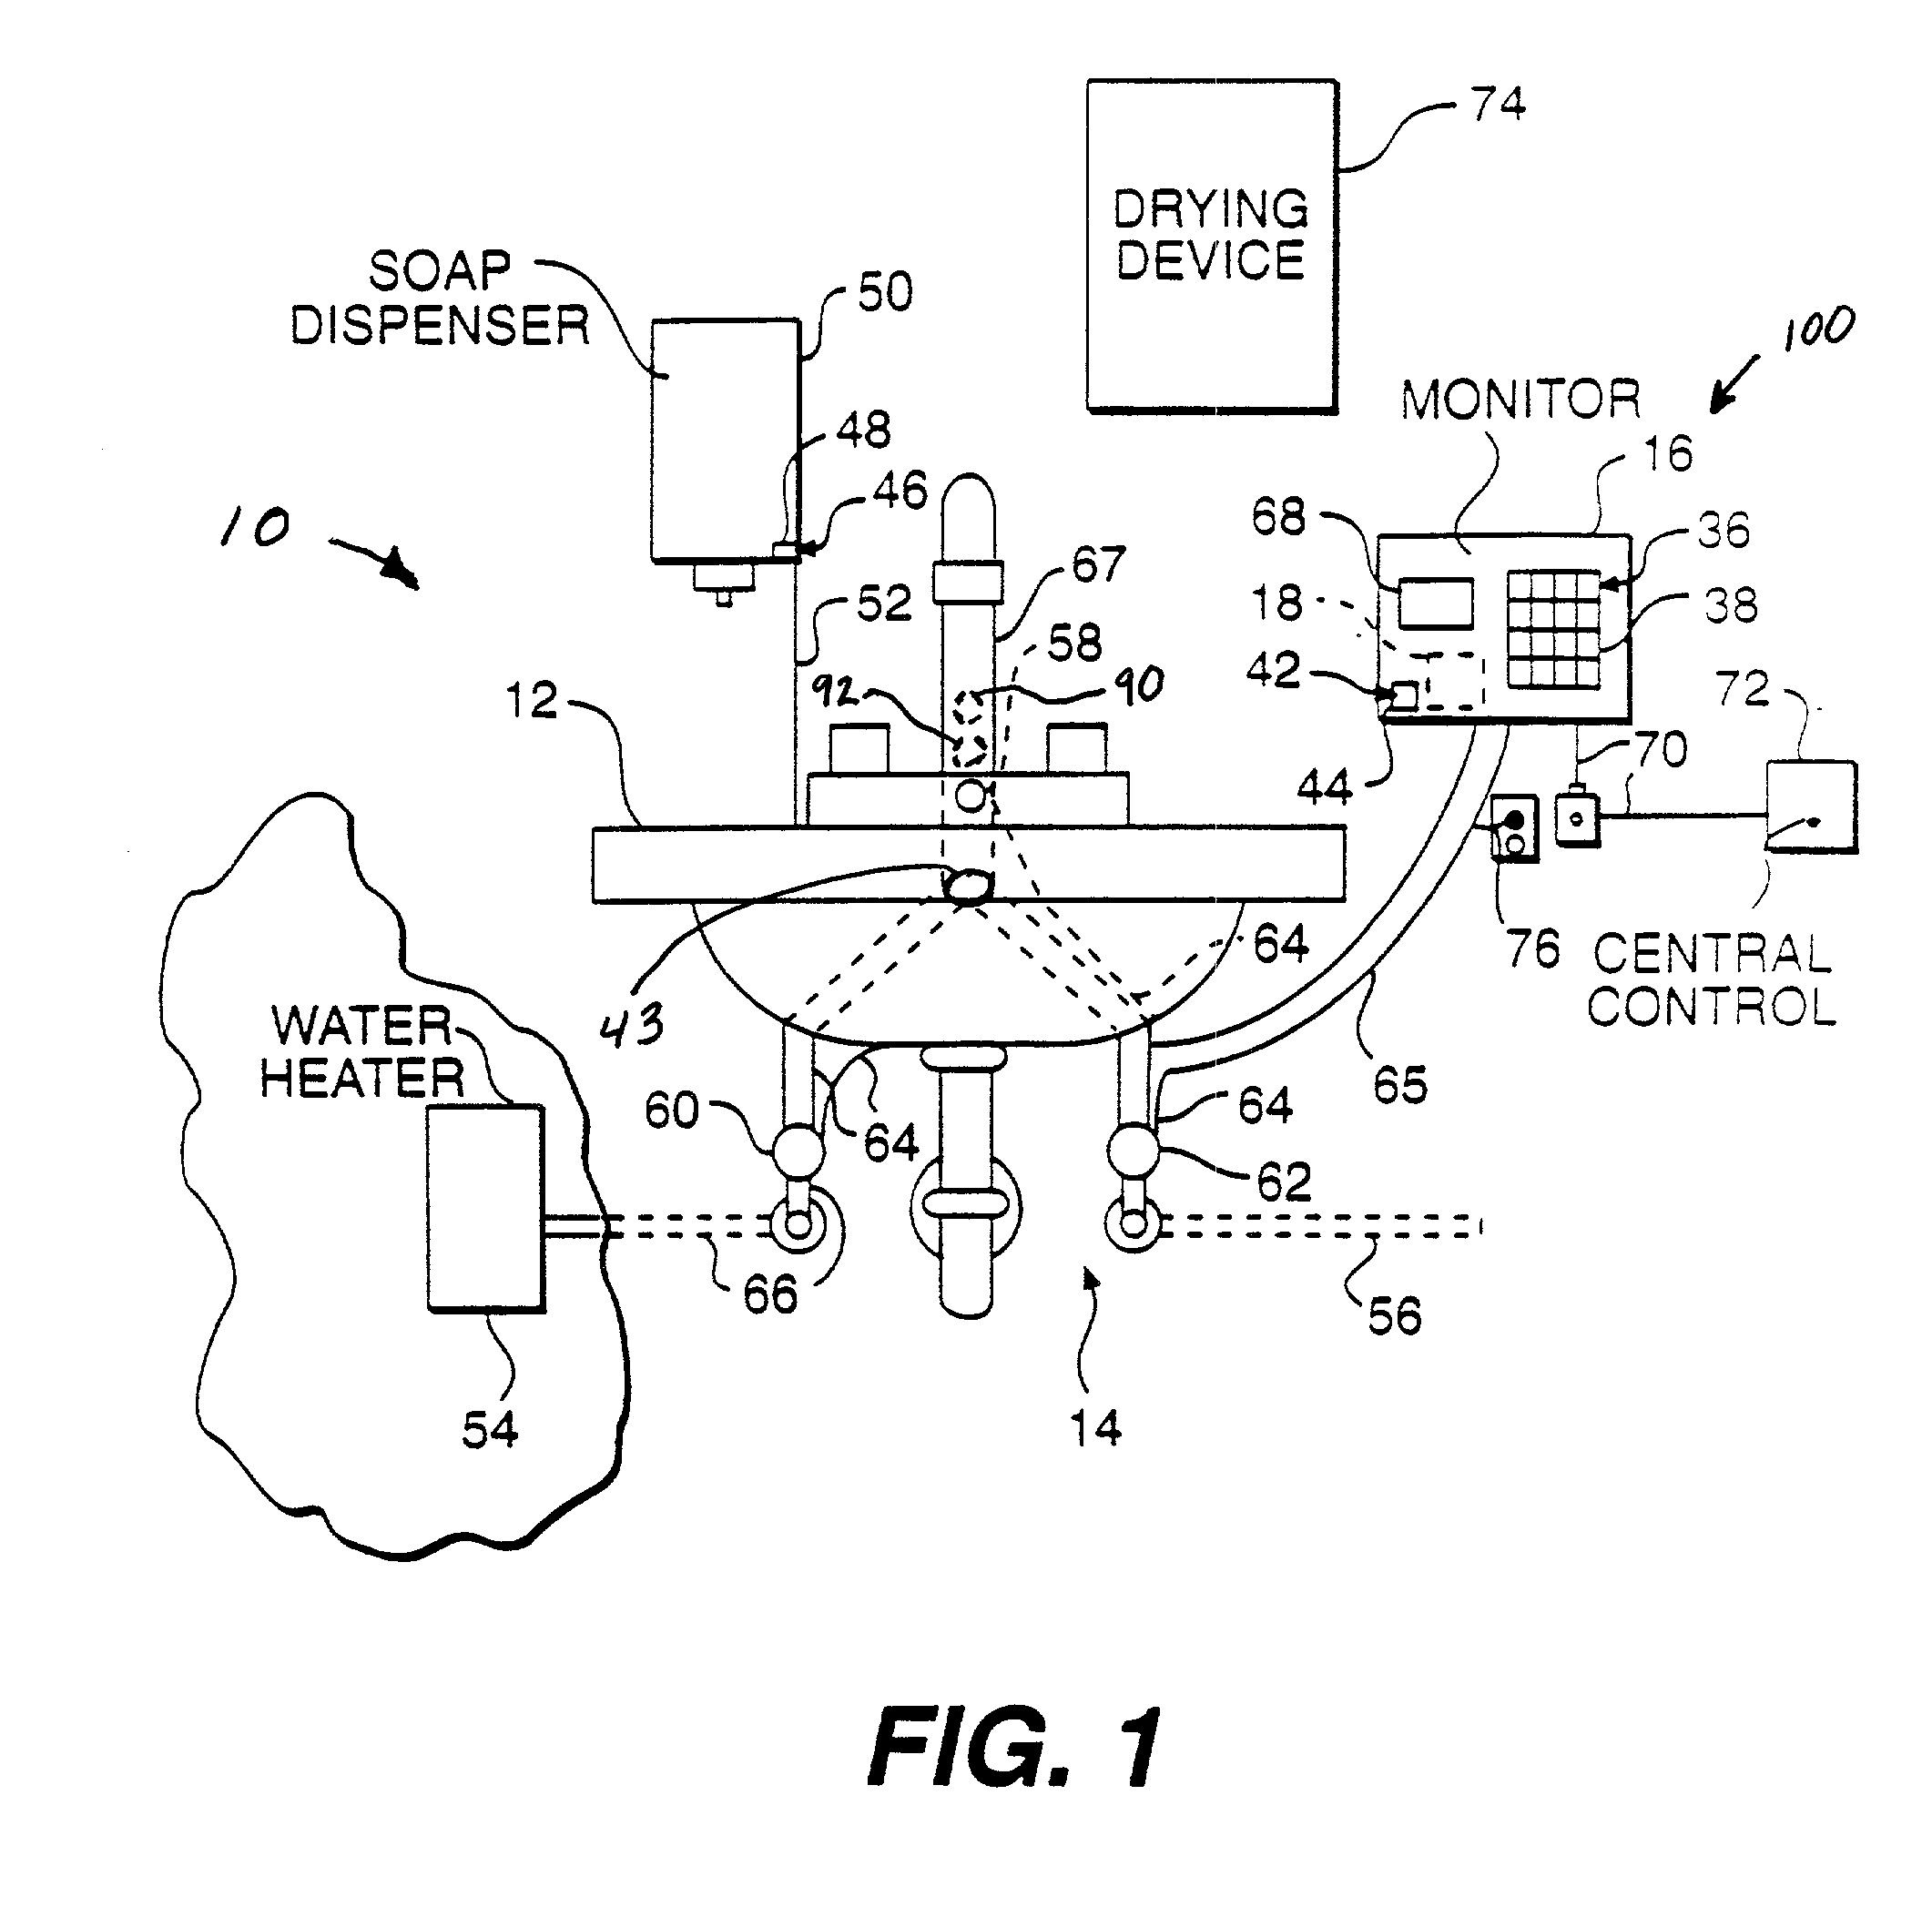 System for controlling operation of a sink